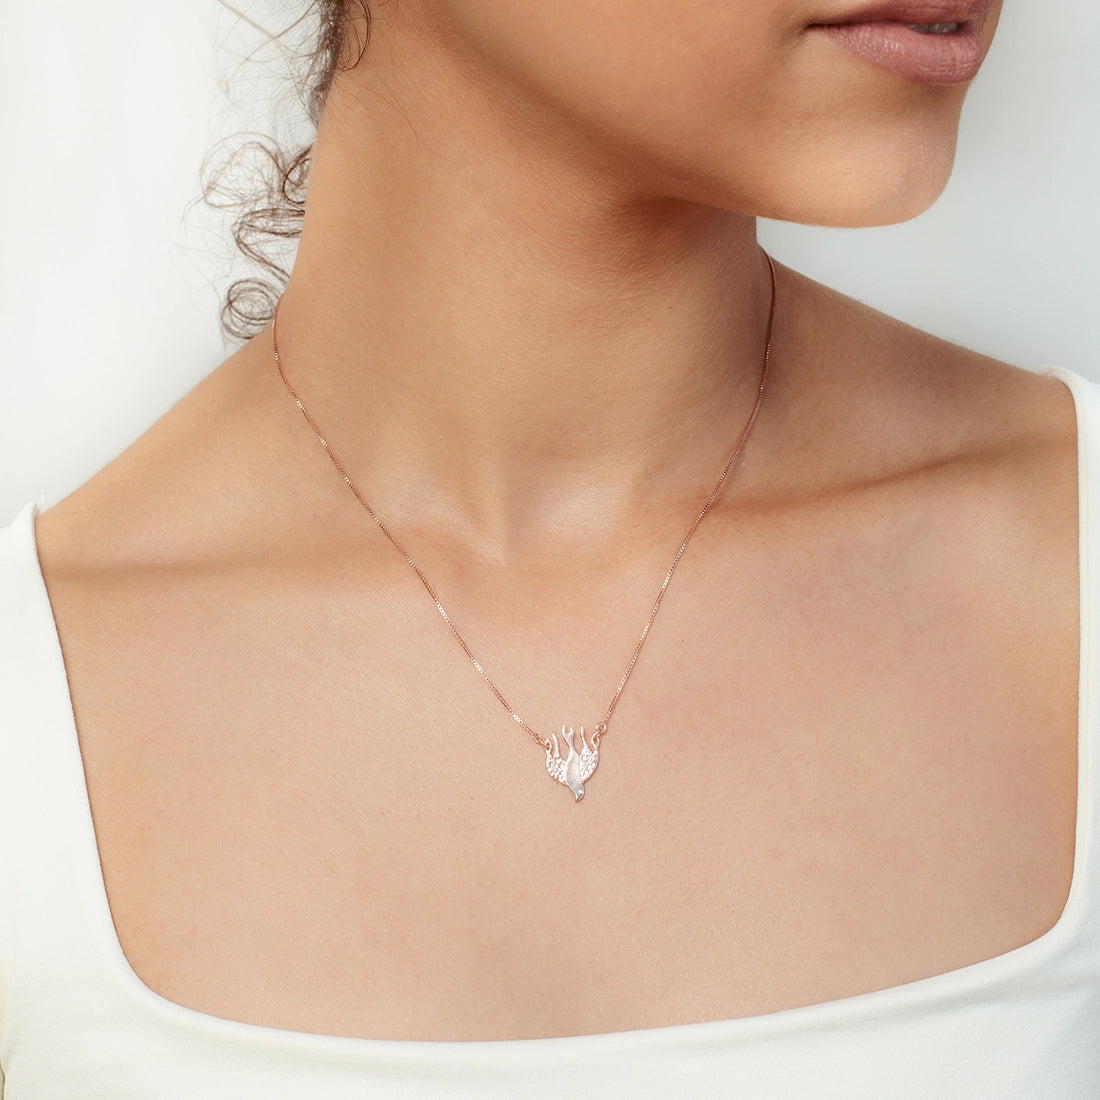 Christian woman wearing the Chispa de la Dove Necklace in rose gold vermeil from the Chispa Collection by Rizen Jewelry.